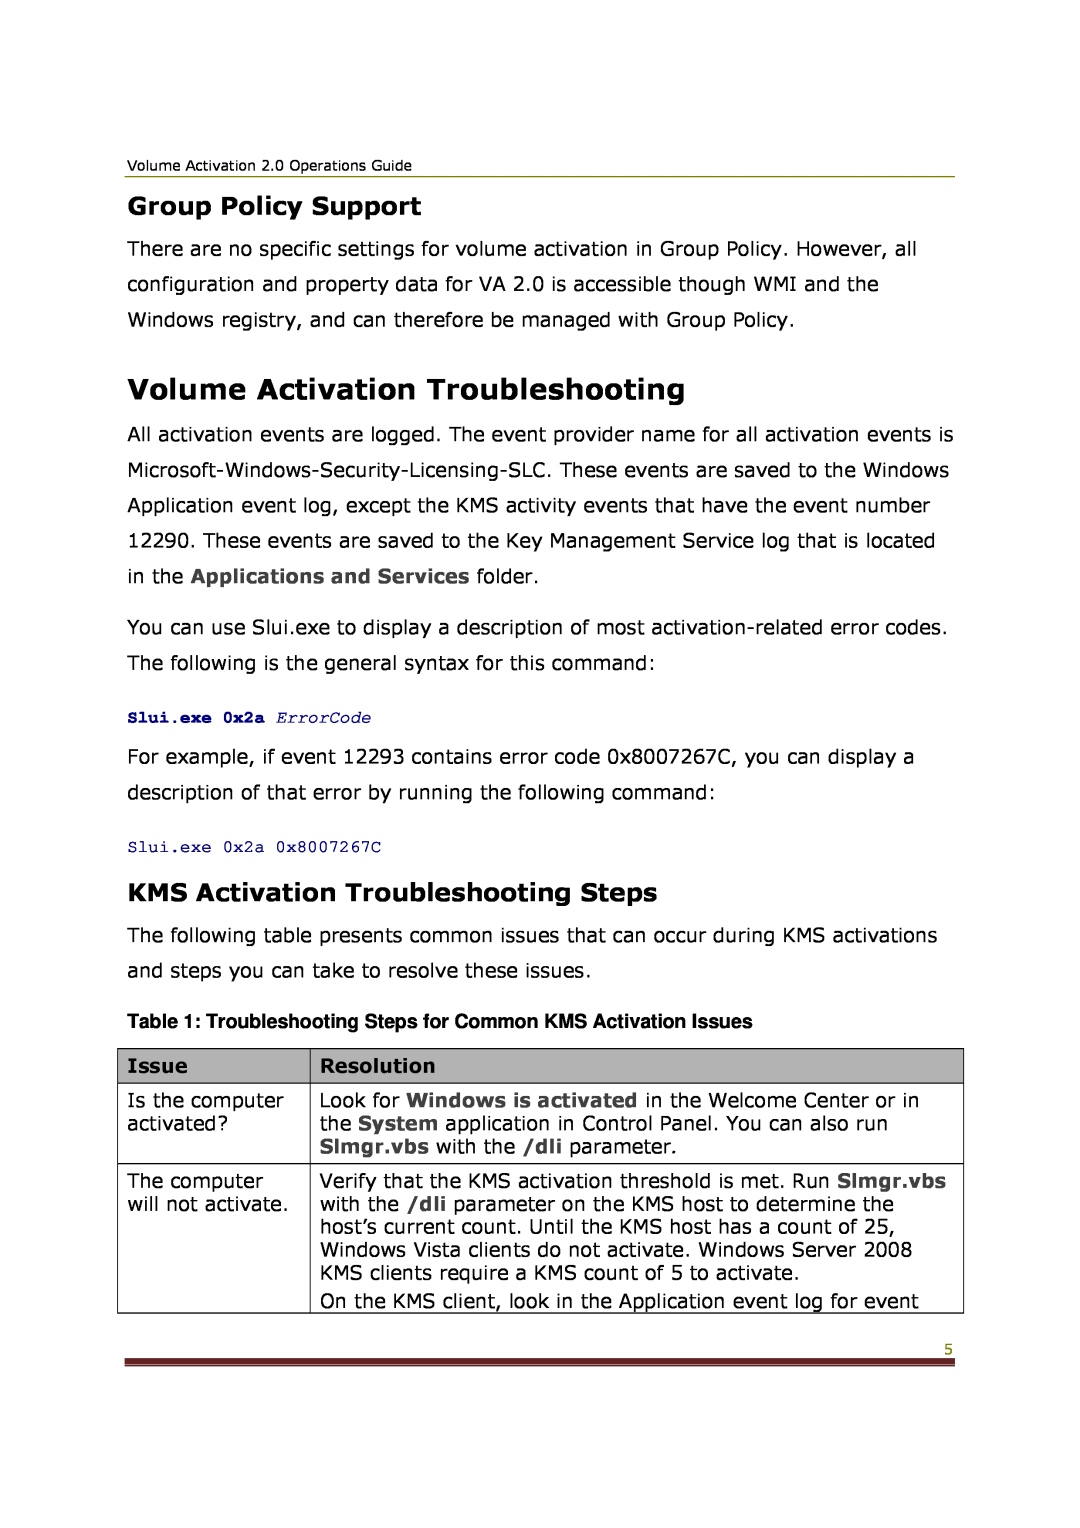 Microsoft 2 manual Volume Activation Troubleshooting, Group Policy Support, KMS Activation Troubleshooting Steps 